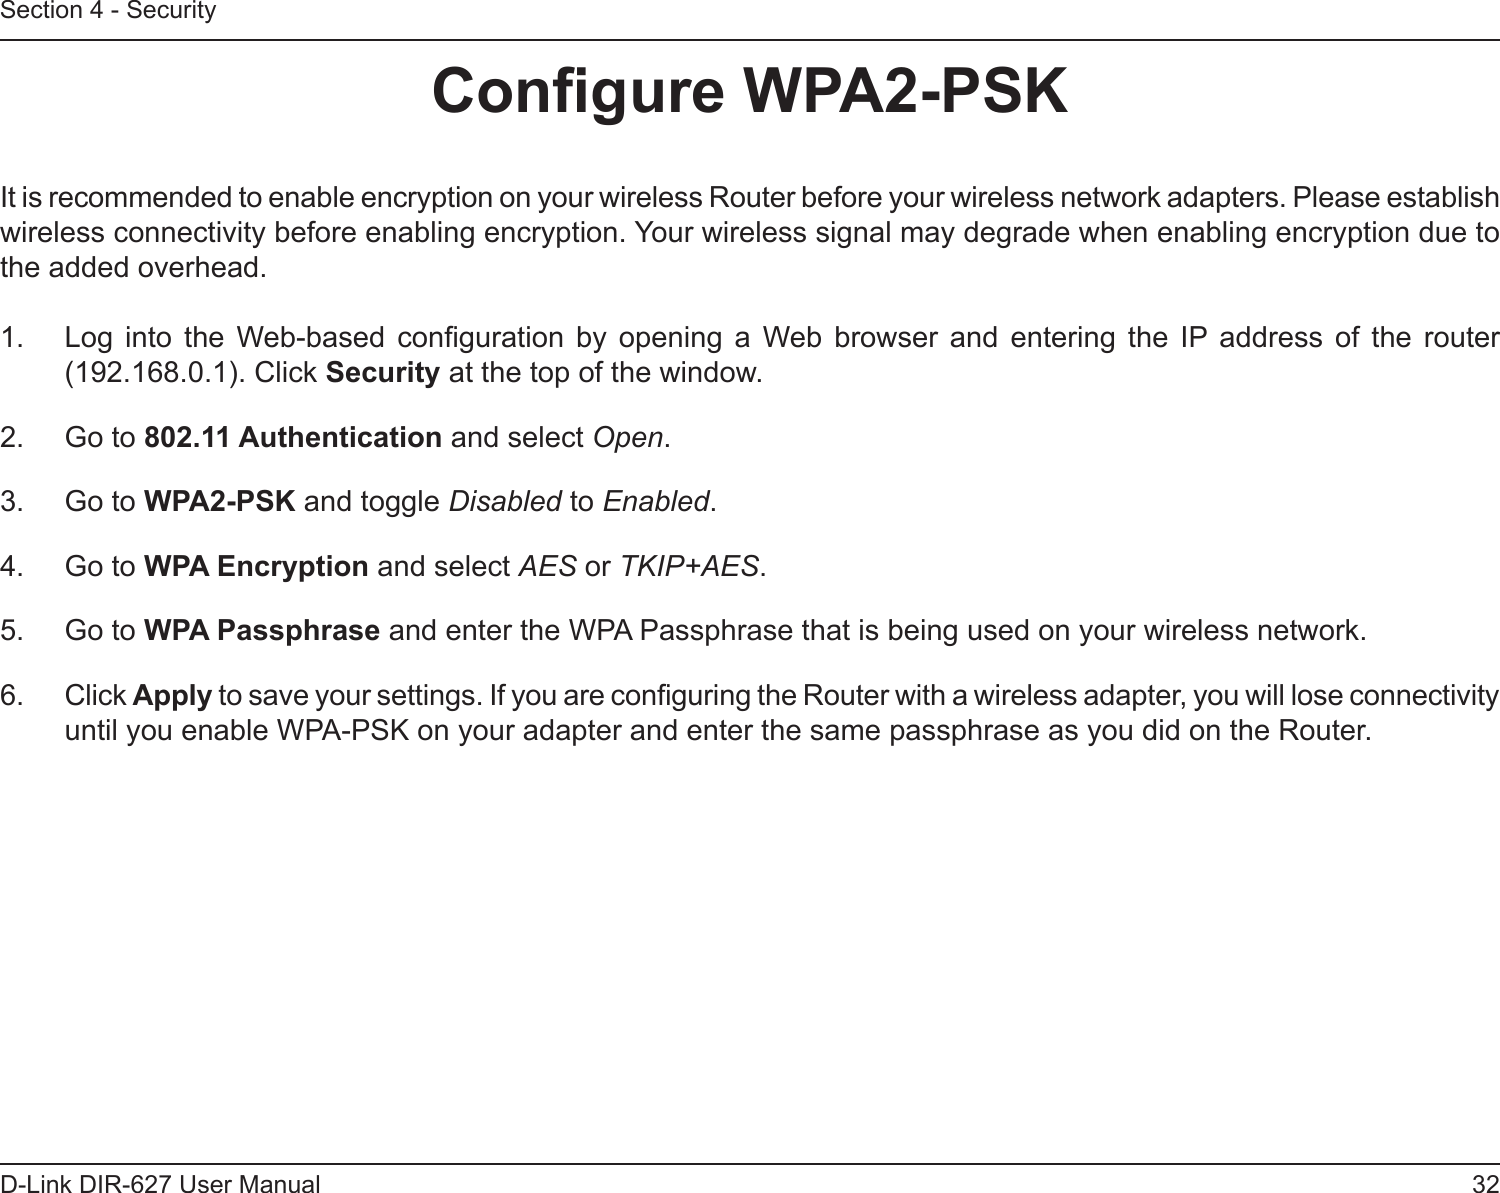 32D-Link DIR-627 User ManualSection 4 - SecurityCongureWPA2-PSKIt is recommended to enable encryption on your wireless Router before your wireless network adapters. Please establish wireless connectivity before enabling encryption. Your wireless signal may degrade when enabling encryption due to the added overhead.1.  Log  into  the  Web-based conguration  by  opening  a  Web  browser  and  entering  the  IP  address  of  the  router (192.168.0.1). Click Security at the top of the window.2.  Go to 802.11Authentication and select Open.3.  Go to WPA2-PSK and toggle Disabled to Enabled.4.  Go to WPAEncryption and select AES or TKIP+AES.5.  Go to WPAPassphrase and enter the WPA Passphrase that is being used on your wireless network.6.  Click Apply to save your settings. If you are conguring the Router with a wireless adapter, you will lose connectivity until you enable WPA-PSK on your adapter and enter the same passphrase as you did on the Router.